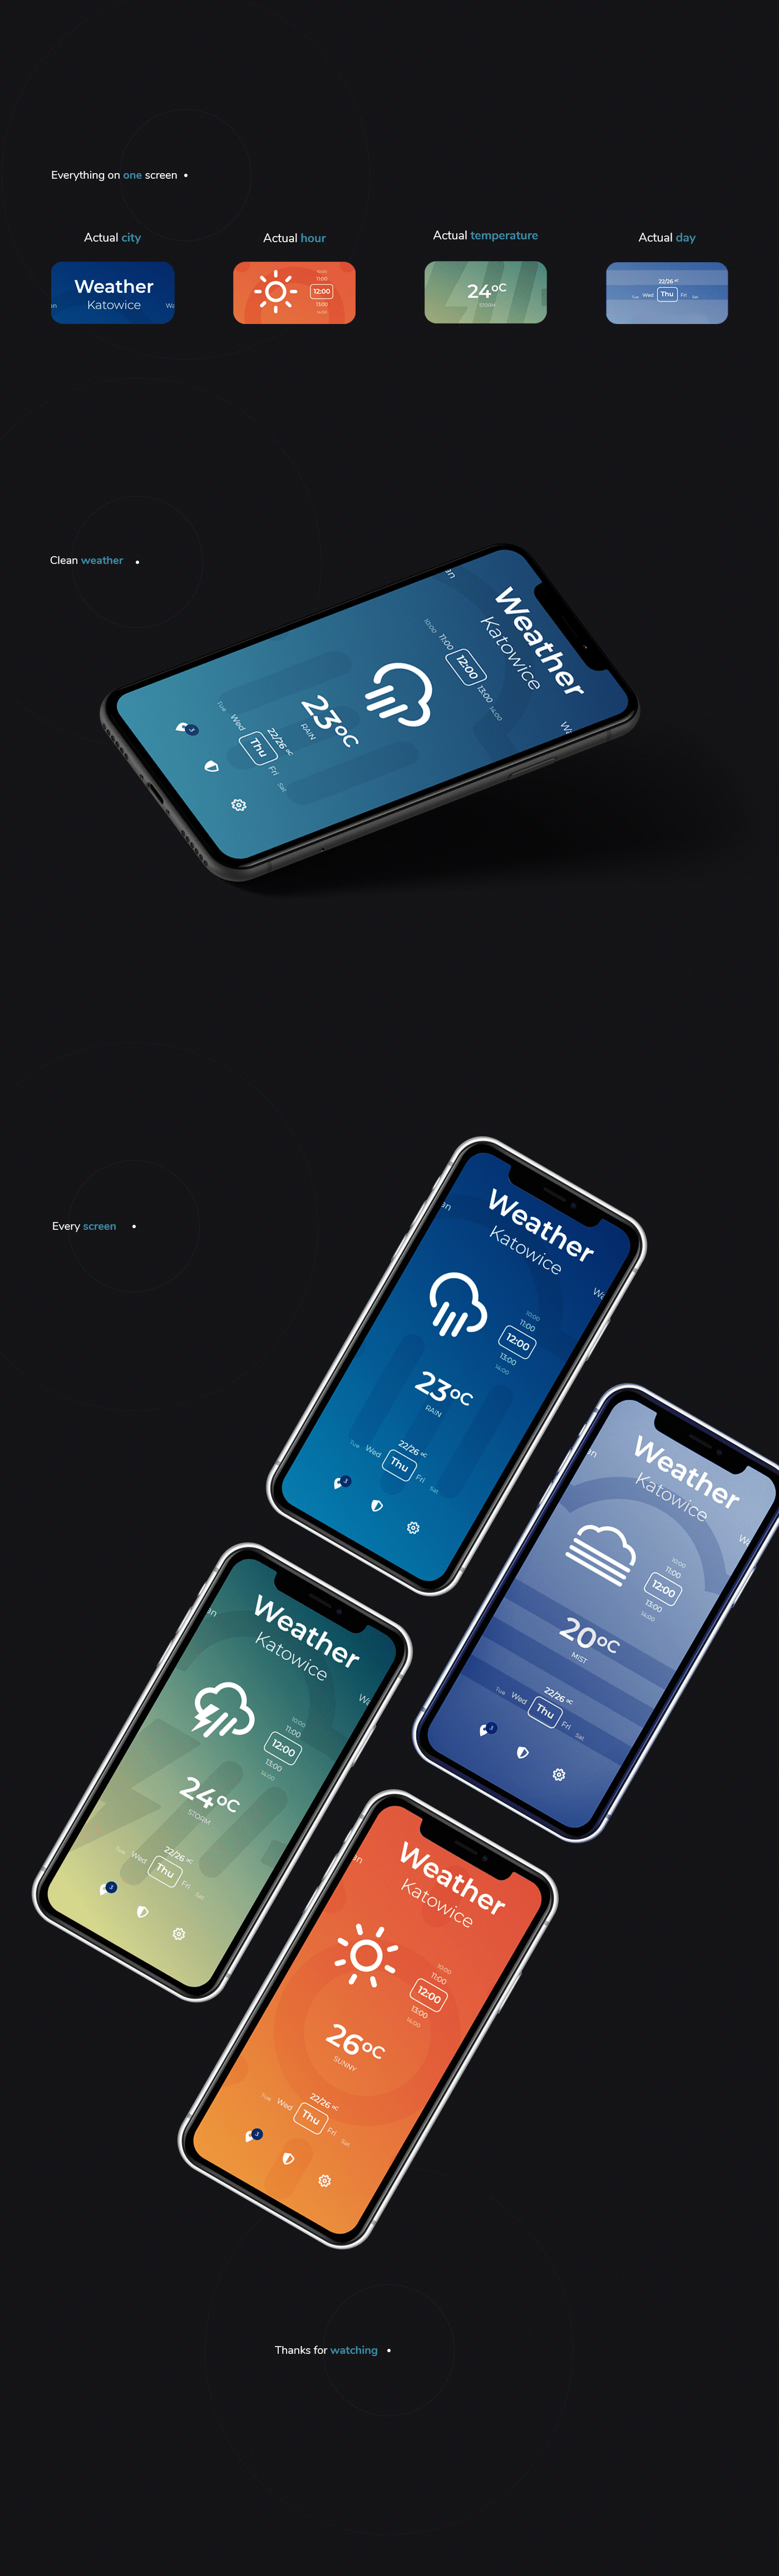 weather app Interface design mobile user Experience user interface digitx